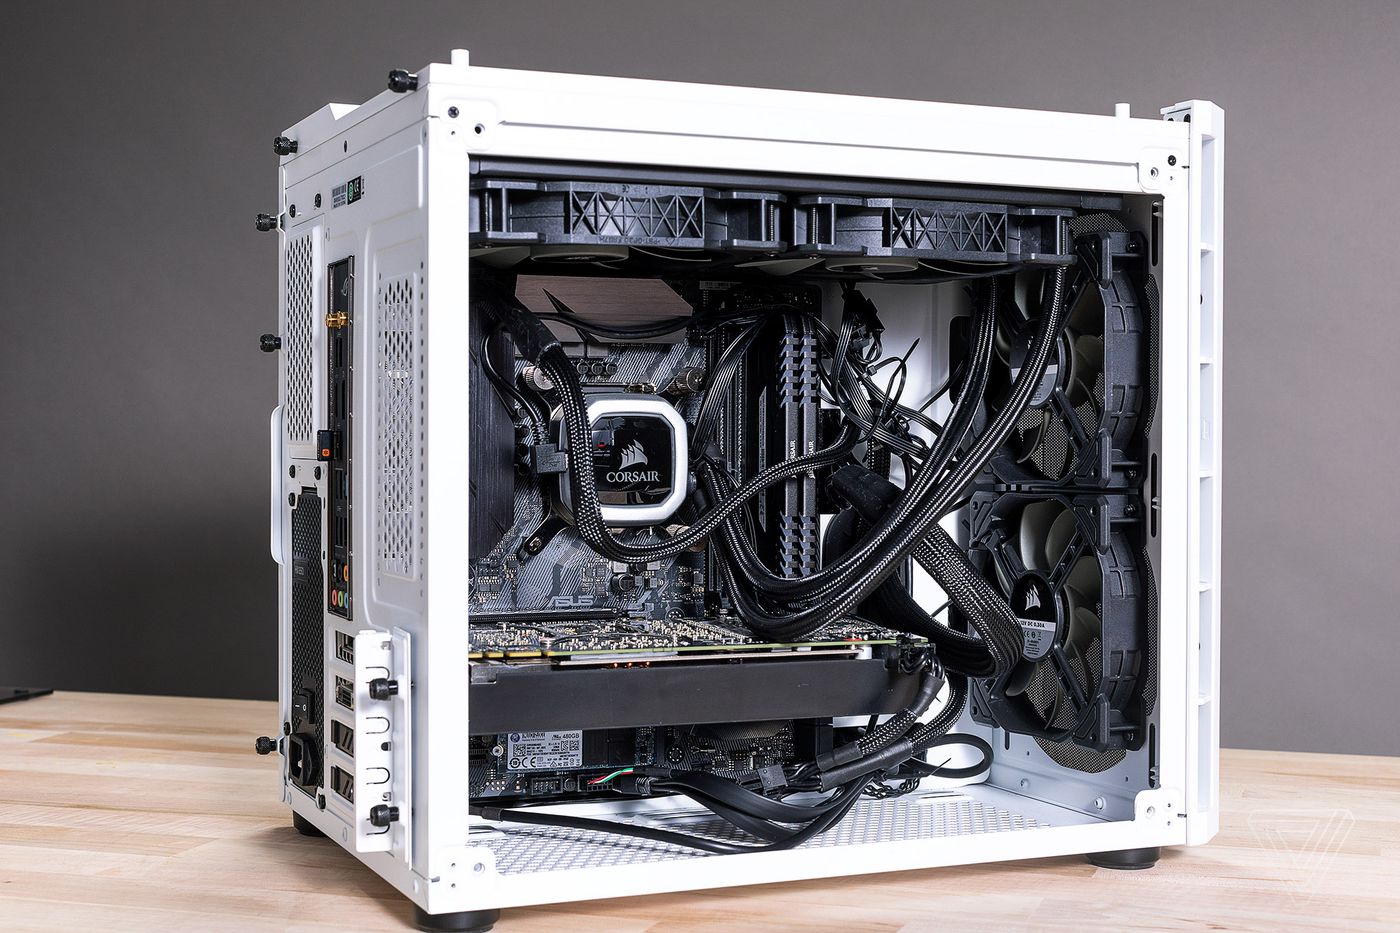 How To Build A Custom Pc For Gaming Editing Or Coding The Verge